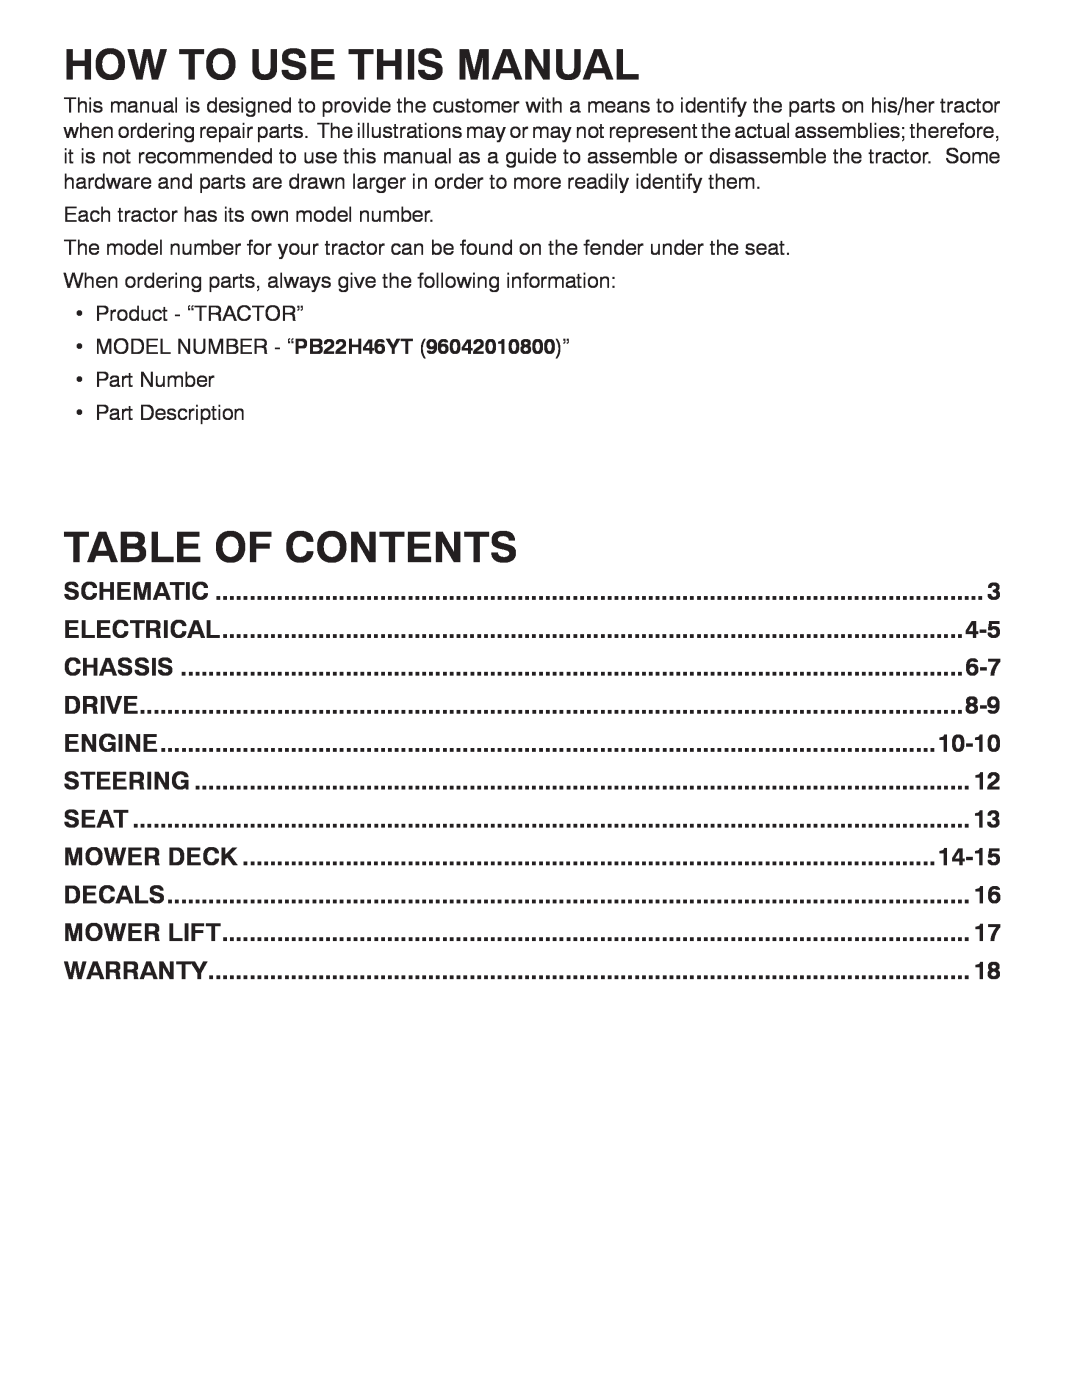 Poulan PB22H46YT How To Use This Manual, Table Of Contents, Chassis, Drive, Engine, Mower Deck, Schematic, Steering, Seat 